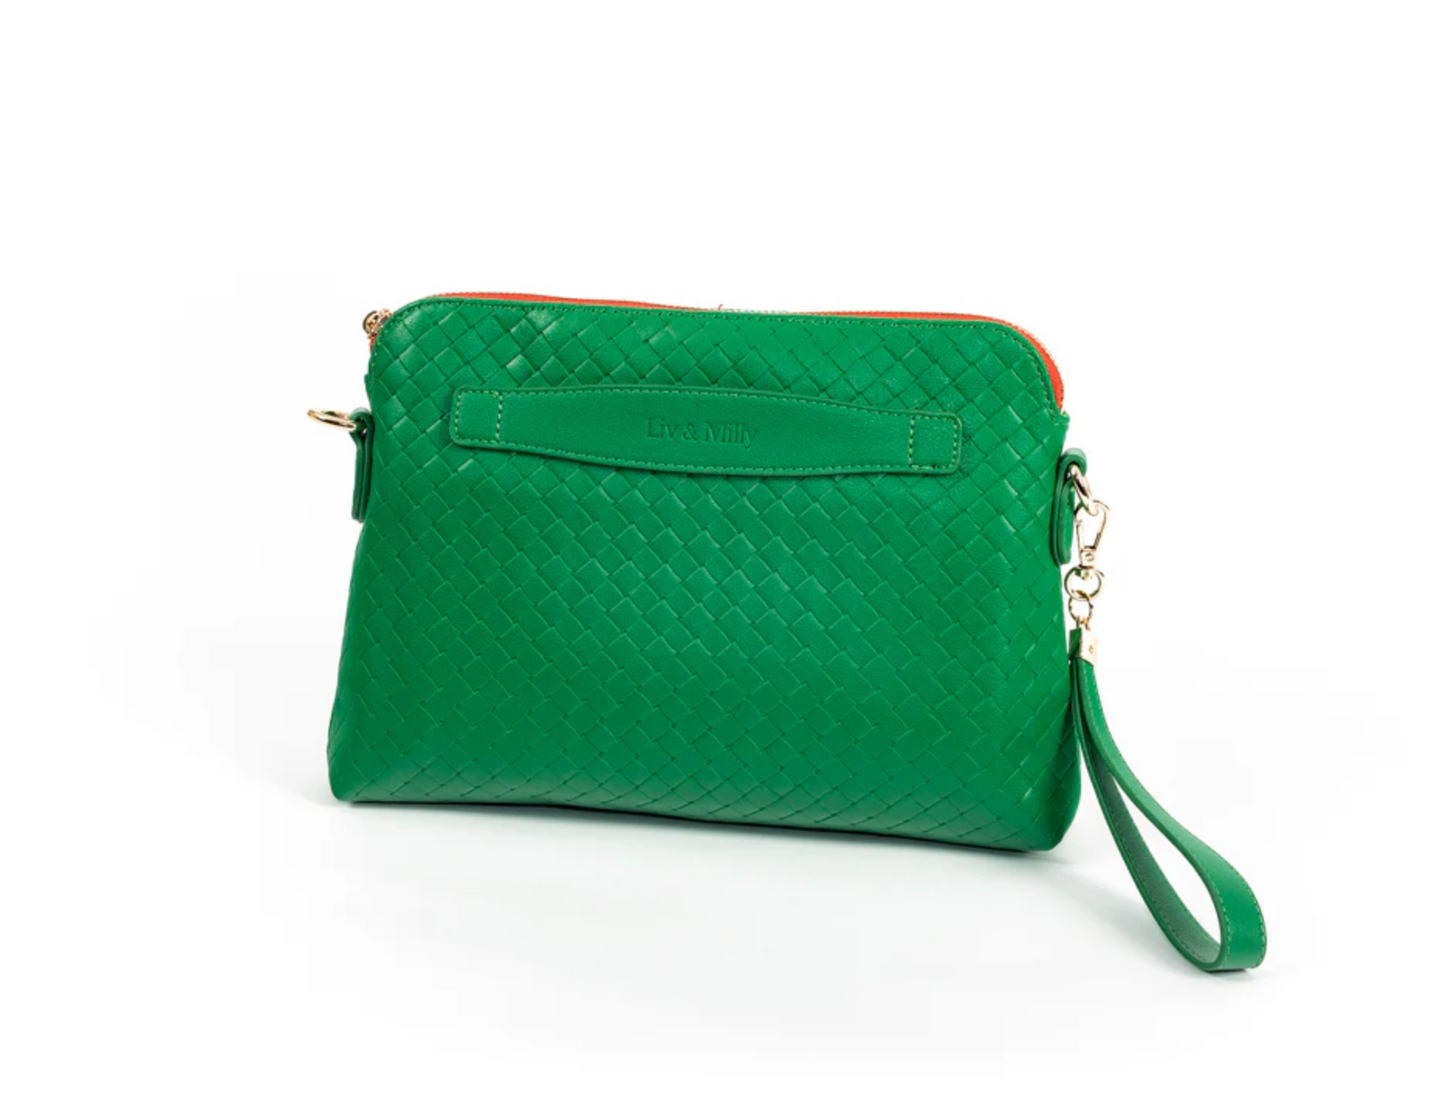 Lucille Bag in Green